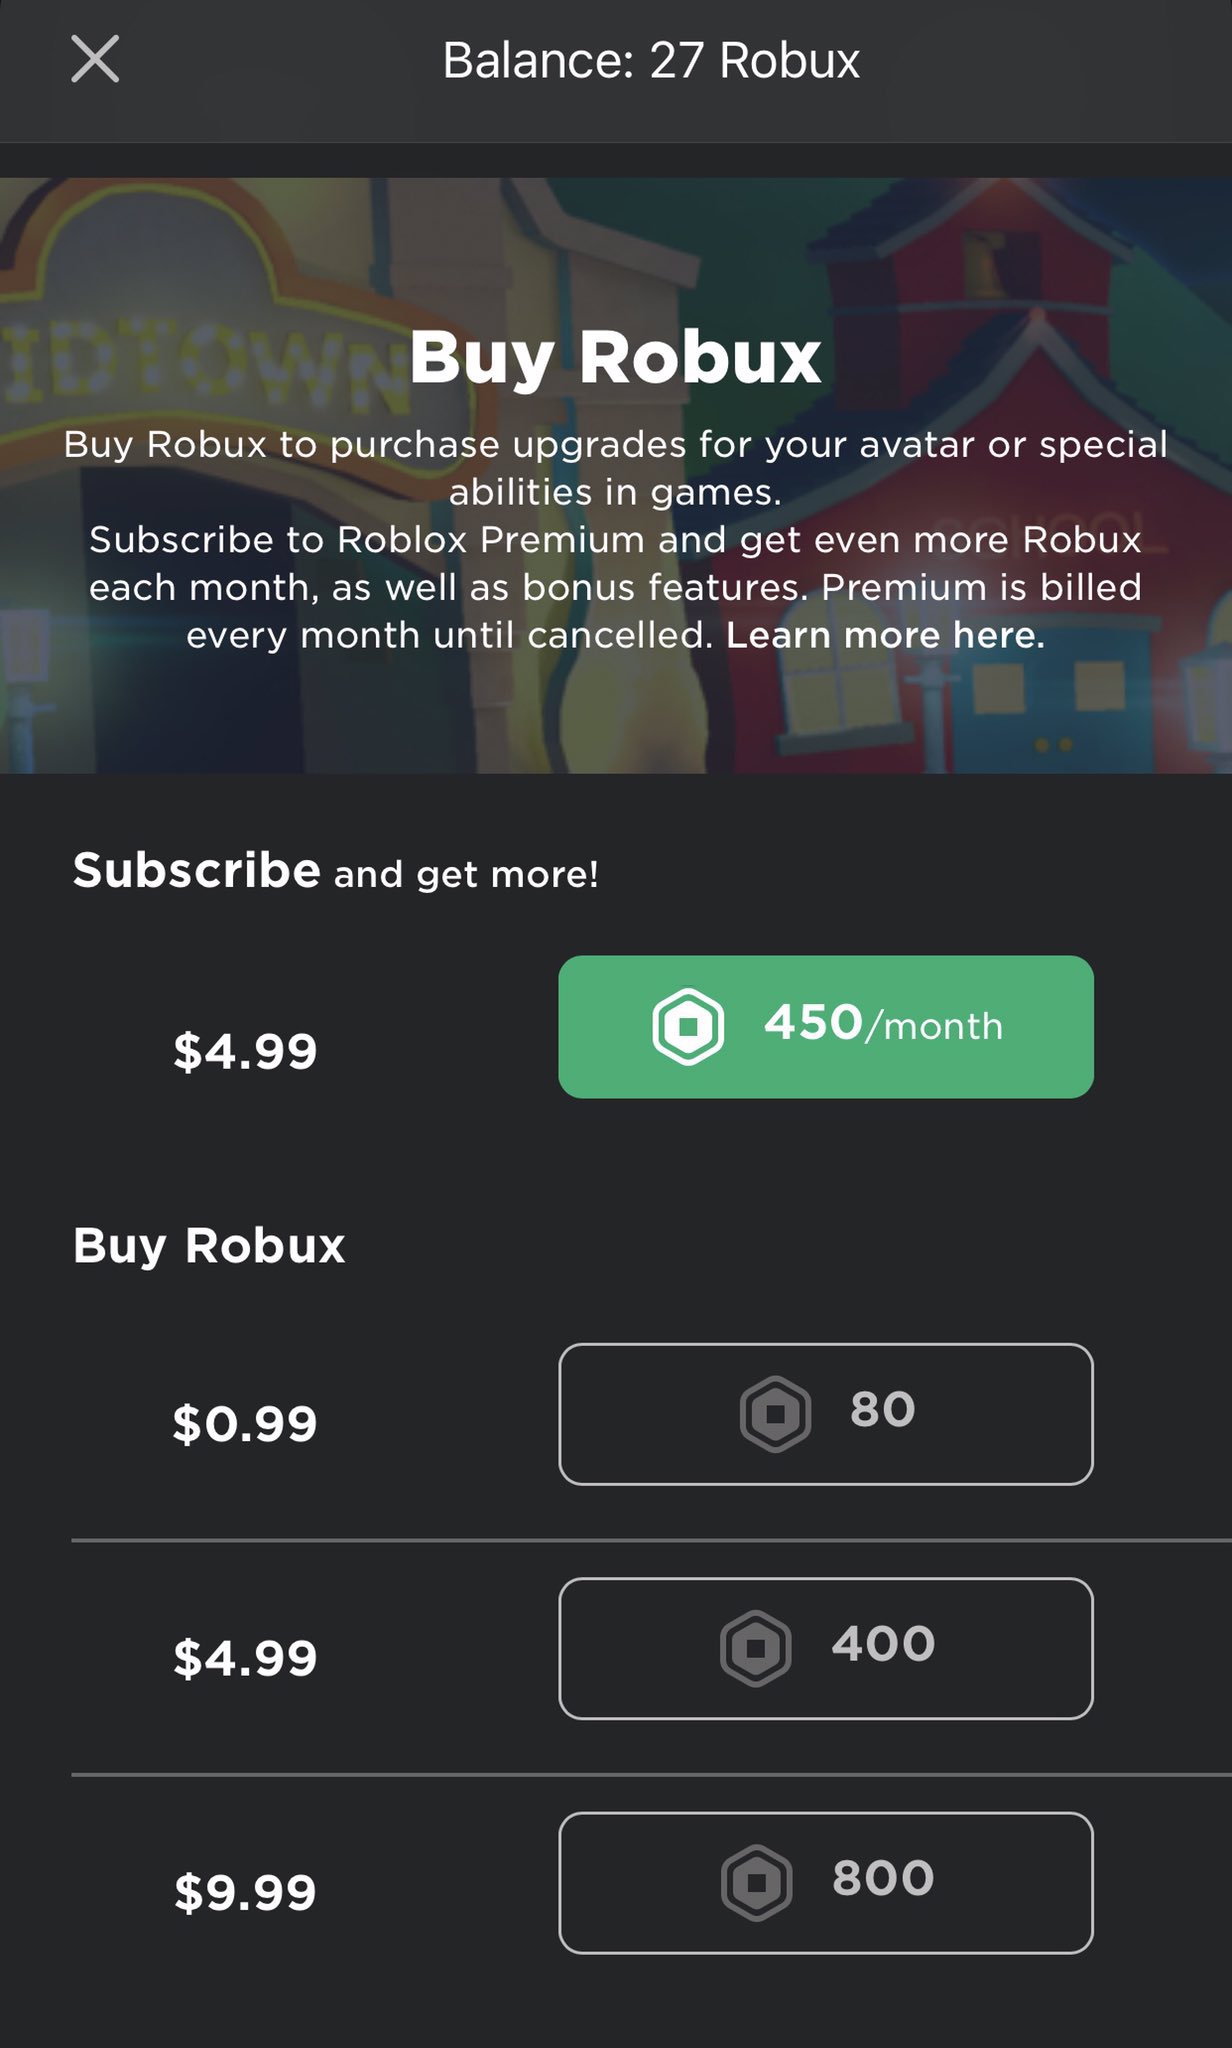 Free Roblox Robux Codes 2023 on X: *10+ BEST ROBLOX PROMO CODES*  APRIL-2021 100% NEWEST UPDATED - LIST OF FREE ROBUX, CLOTHES & REWARD ( CODES)  Retweet for more codes 😊😍🙏👍 #roblox #